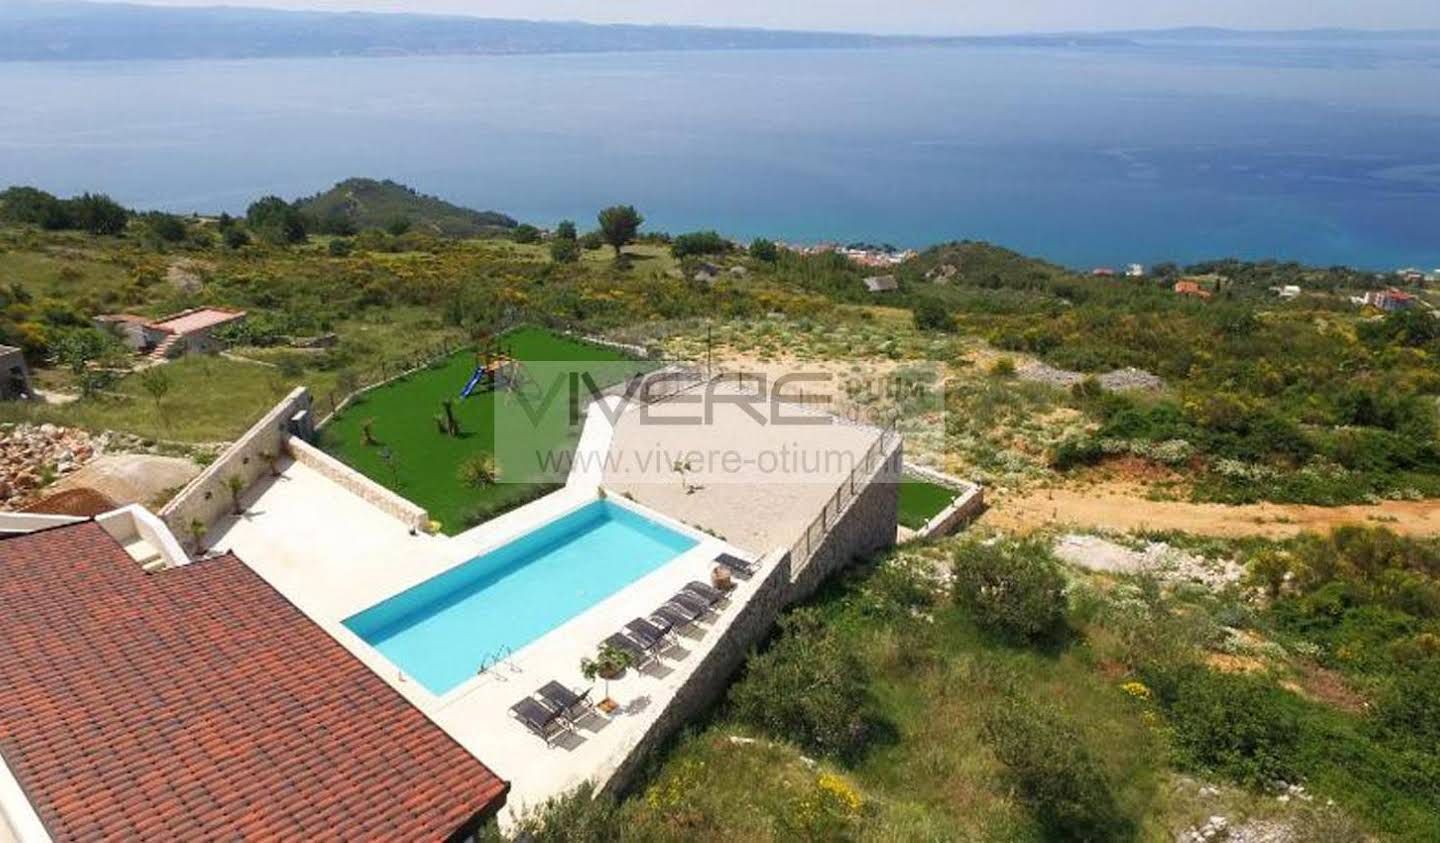 Villa with pool and terrace Split